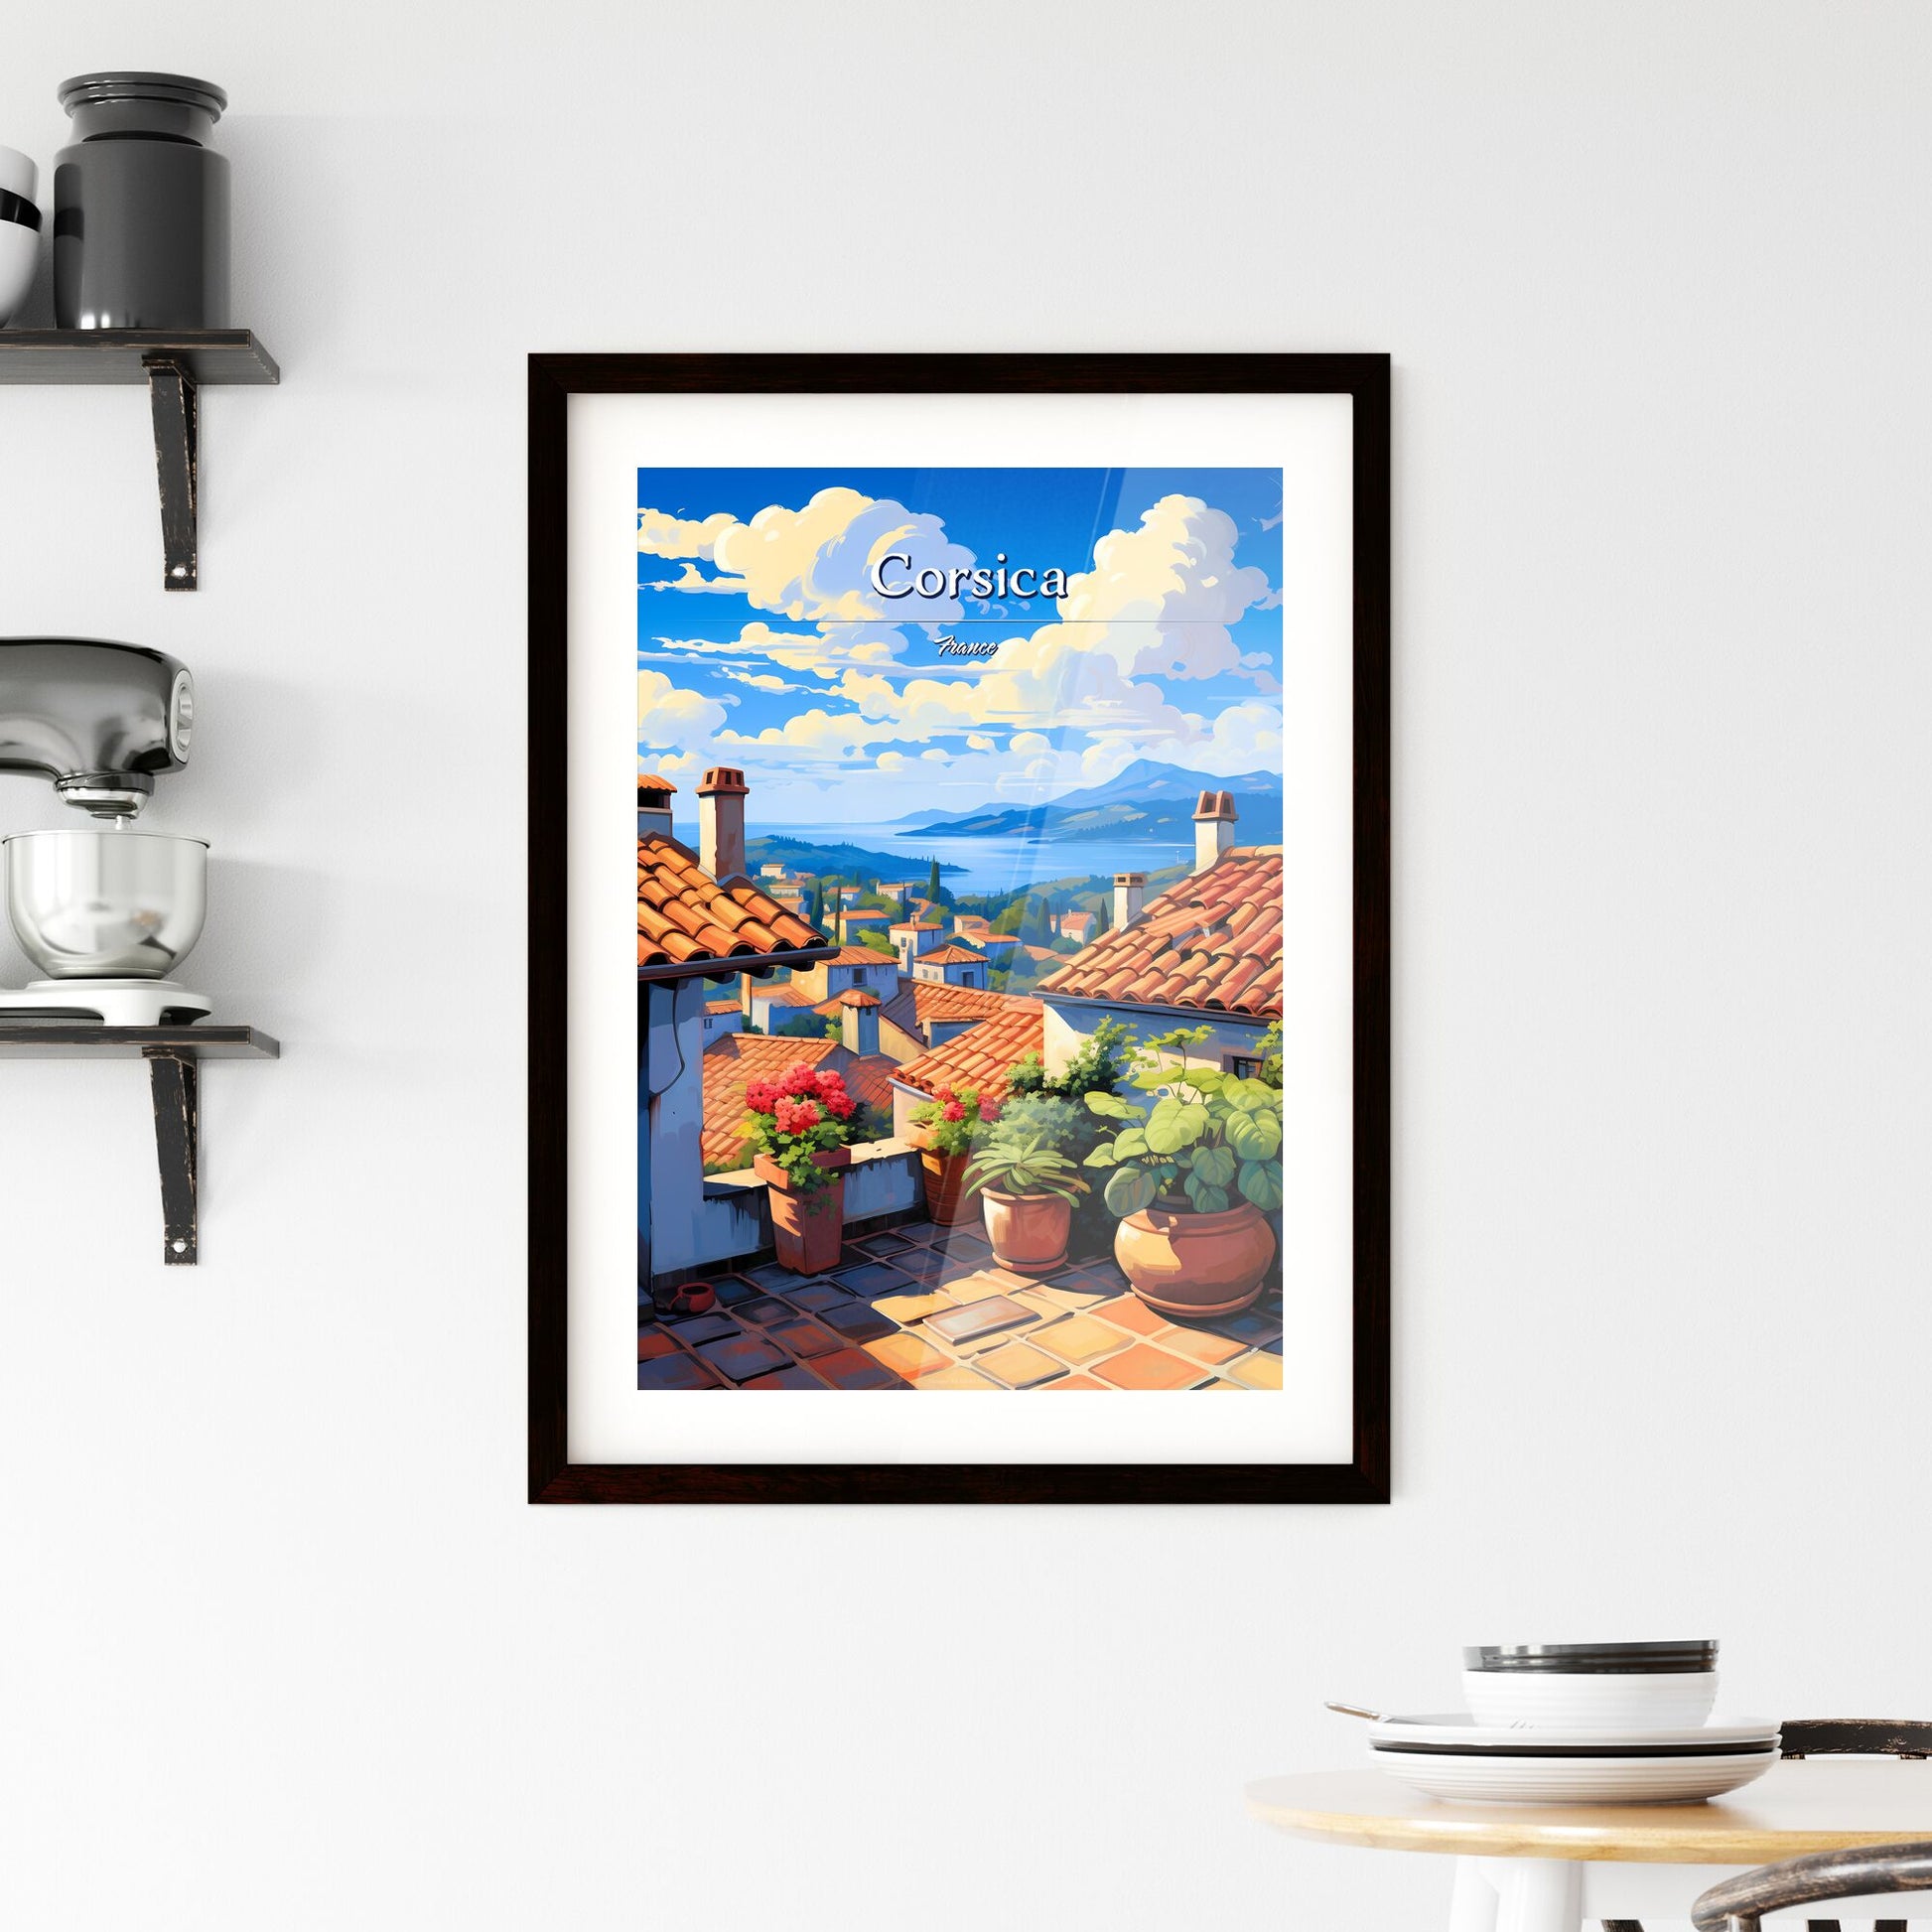 On the roofs of Corsica, France - Art print of a rooftop of a town with potted plants and a view of the water Default Title